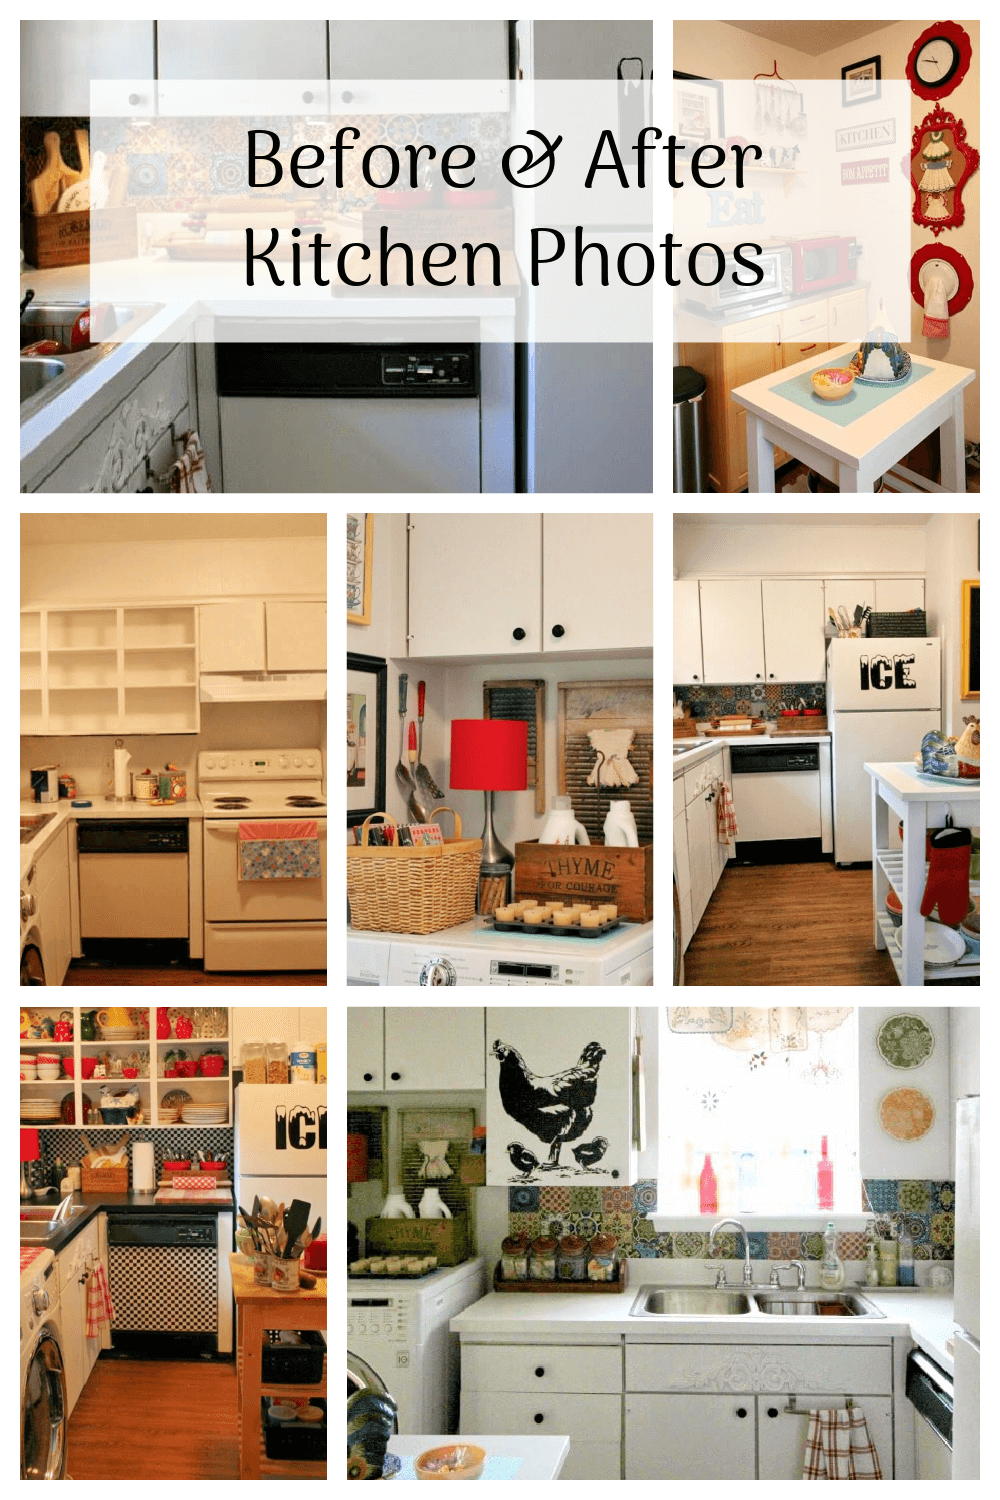 Before & After Kitchen Photos